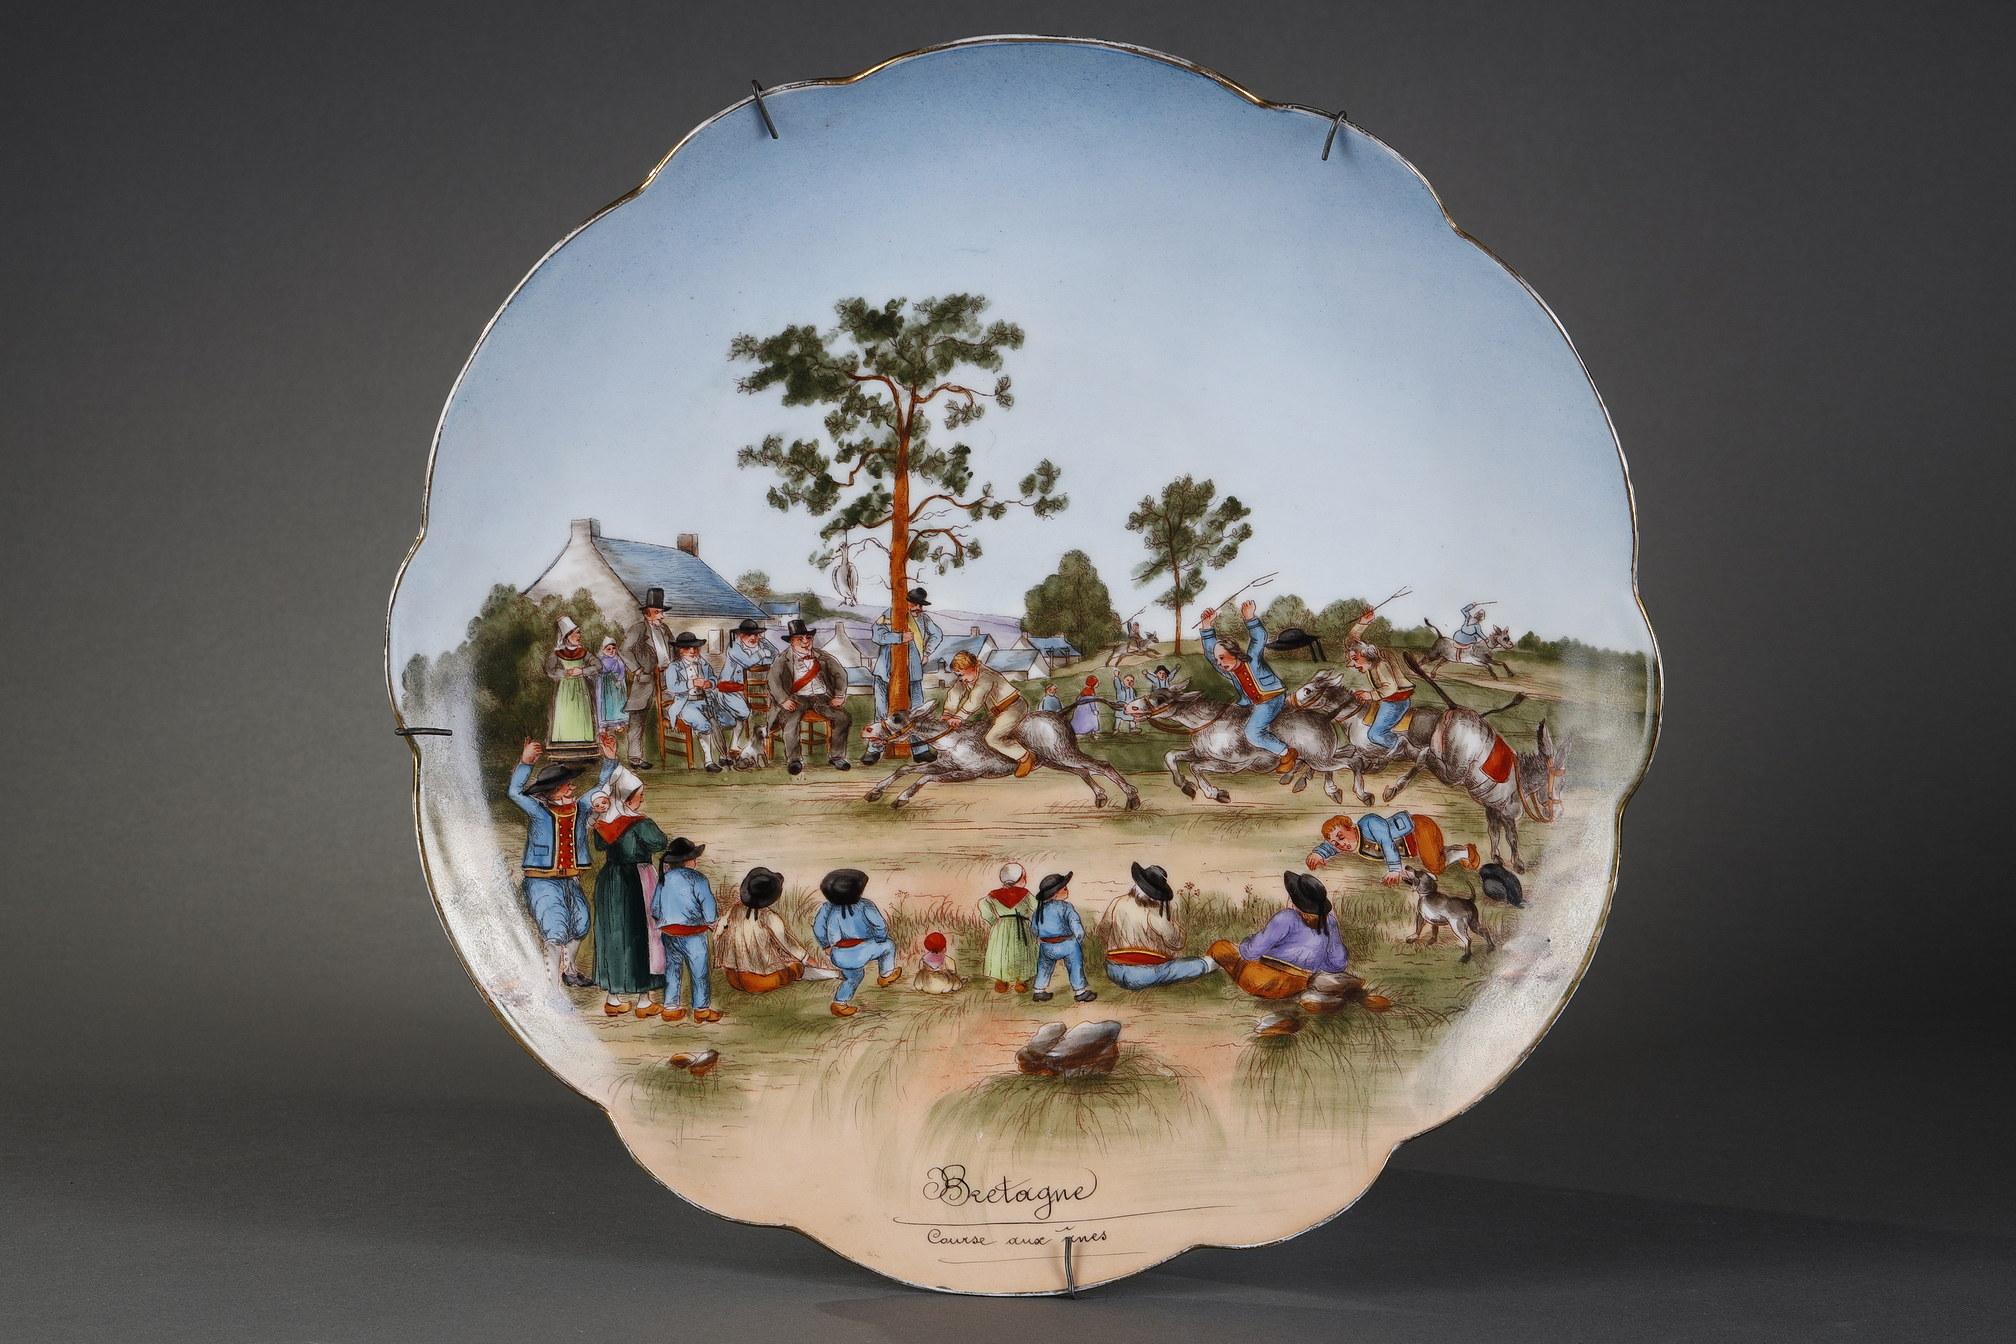 Charming Limoges porcelain dish with scalloped edges representing a popular festival, a donkey race in a village in Bretagne, attended by families in traditional outfits. 

Maximilien-Ferdinand Mérigot (1822-1892) is a French porcelain painter who